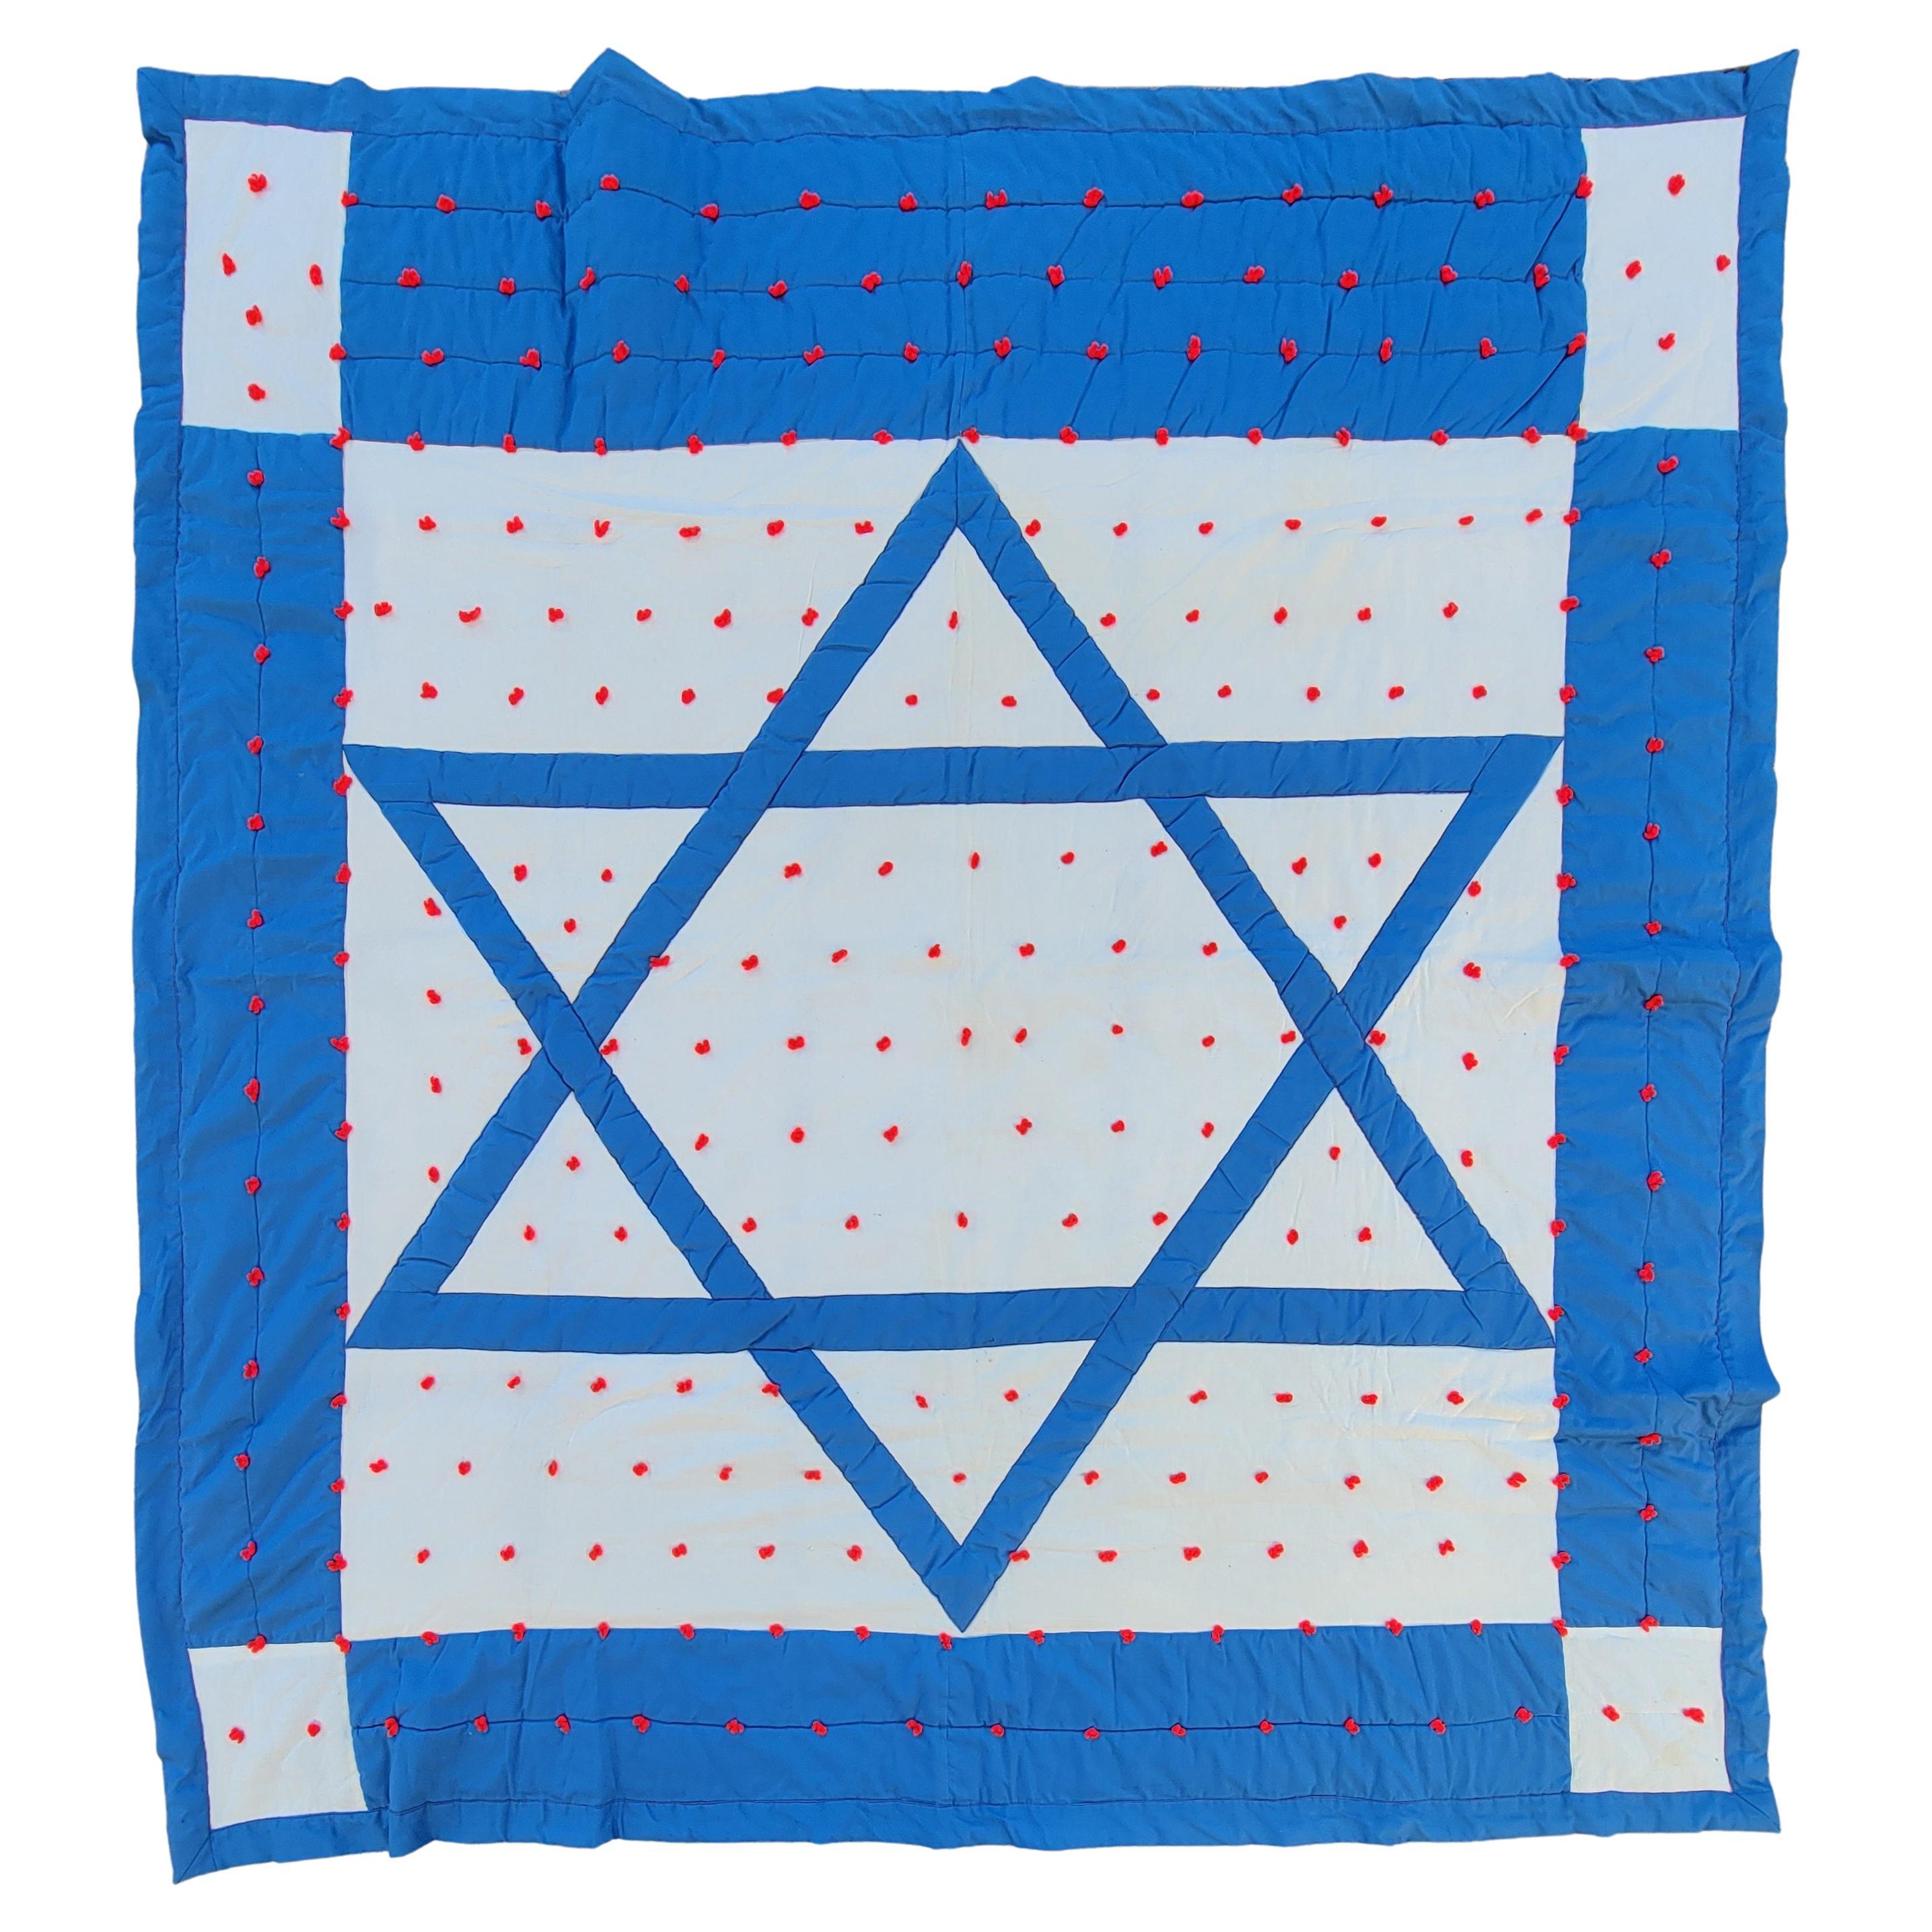 30s Blue and White Star of David Quilt 